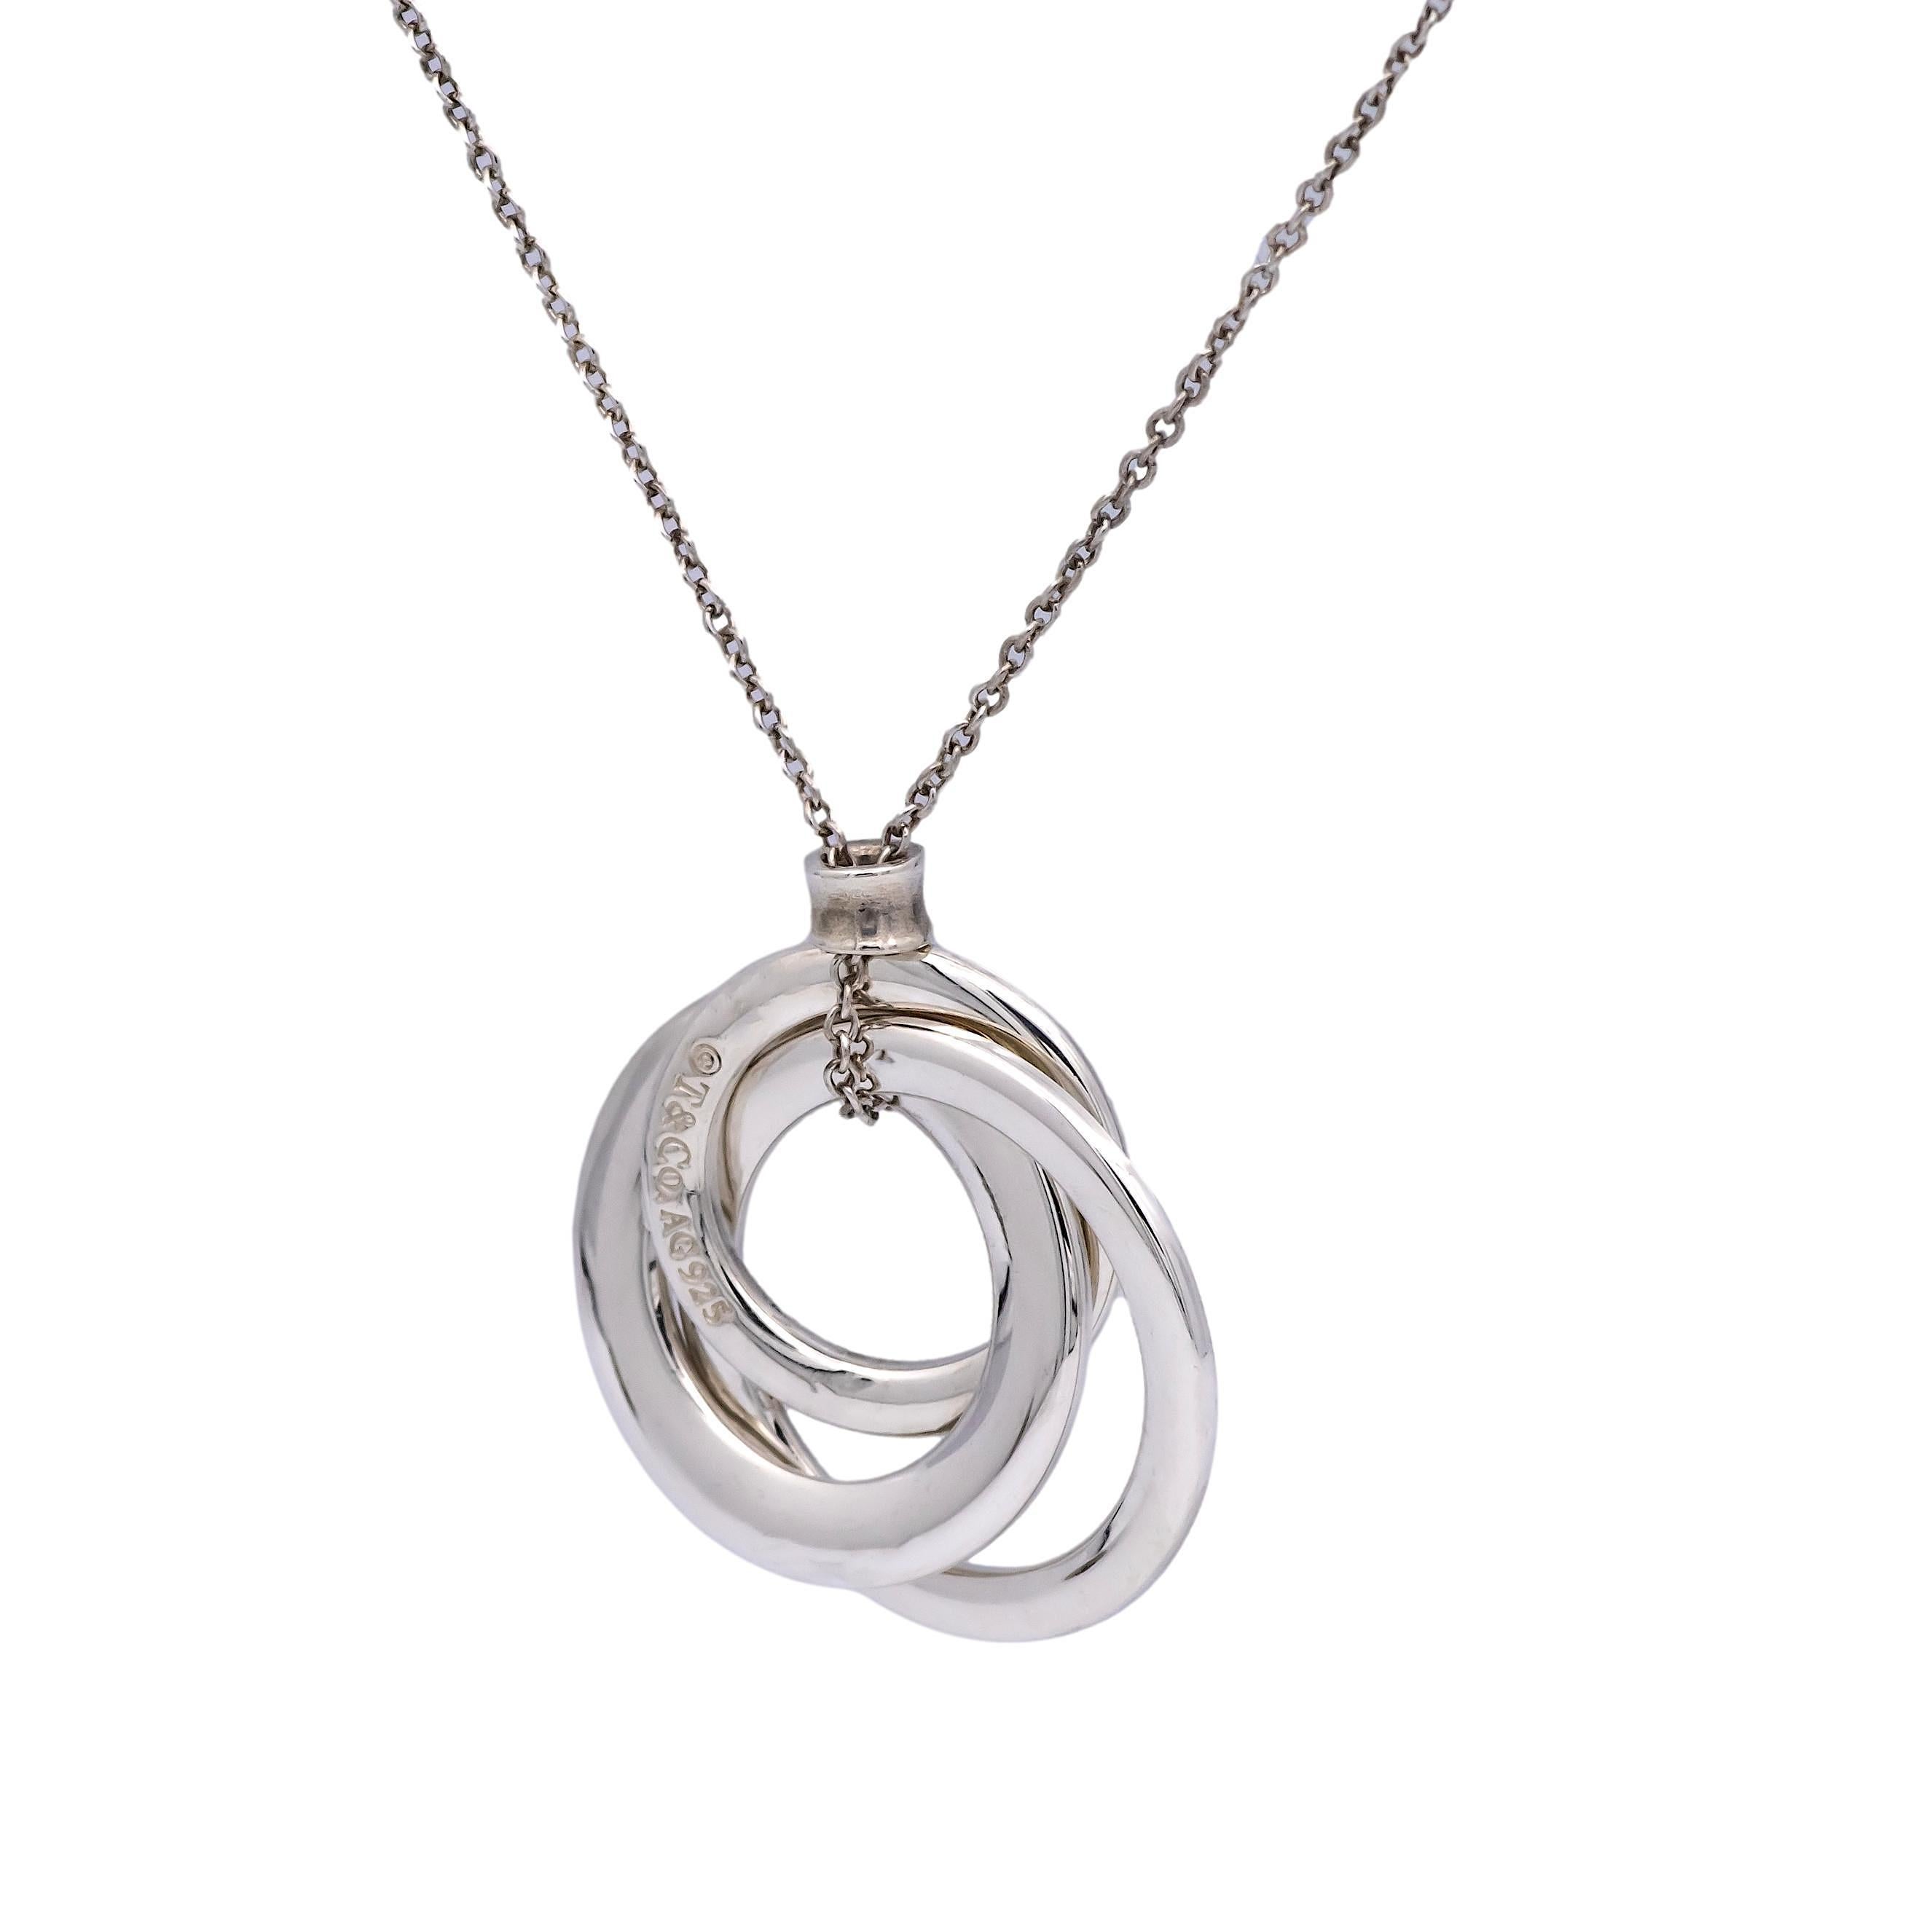 Tiffany & Co. silver necklace from the 1837 Circles collection finely crafted in sterling silver featuring three interlocking open circles hanging off a thin round link chain measuring 18